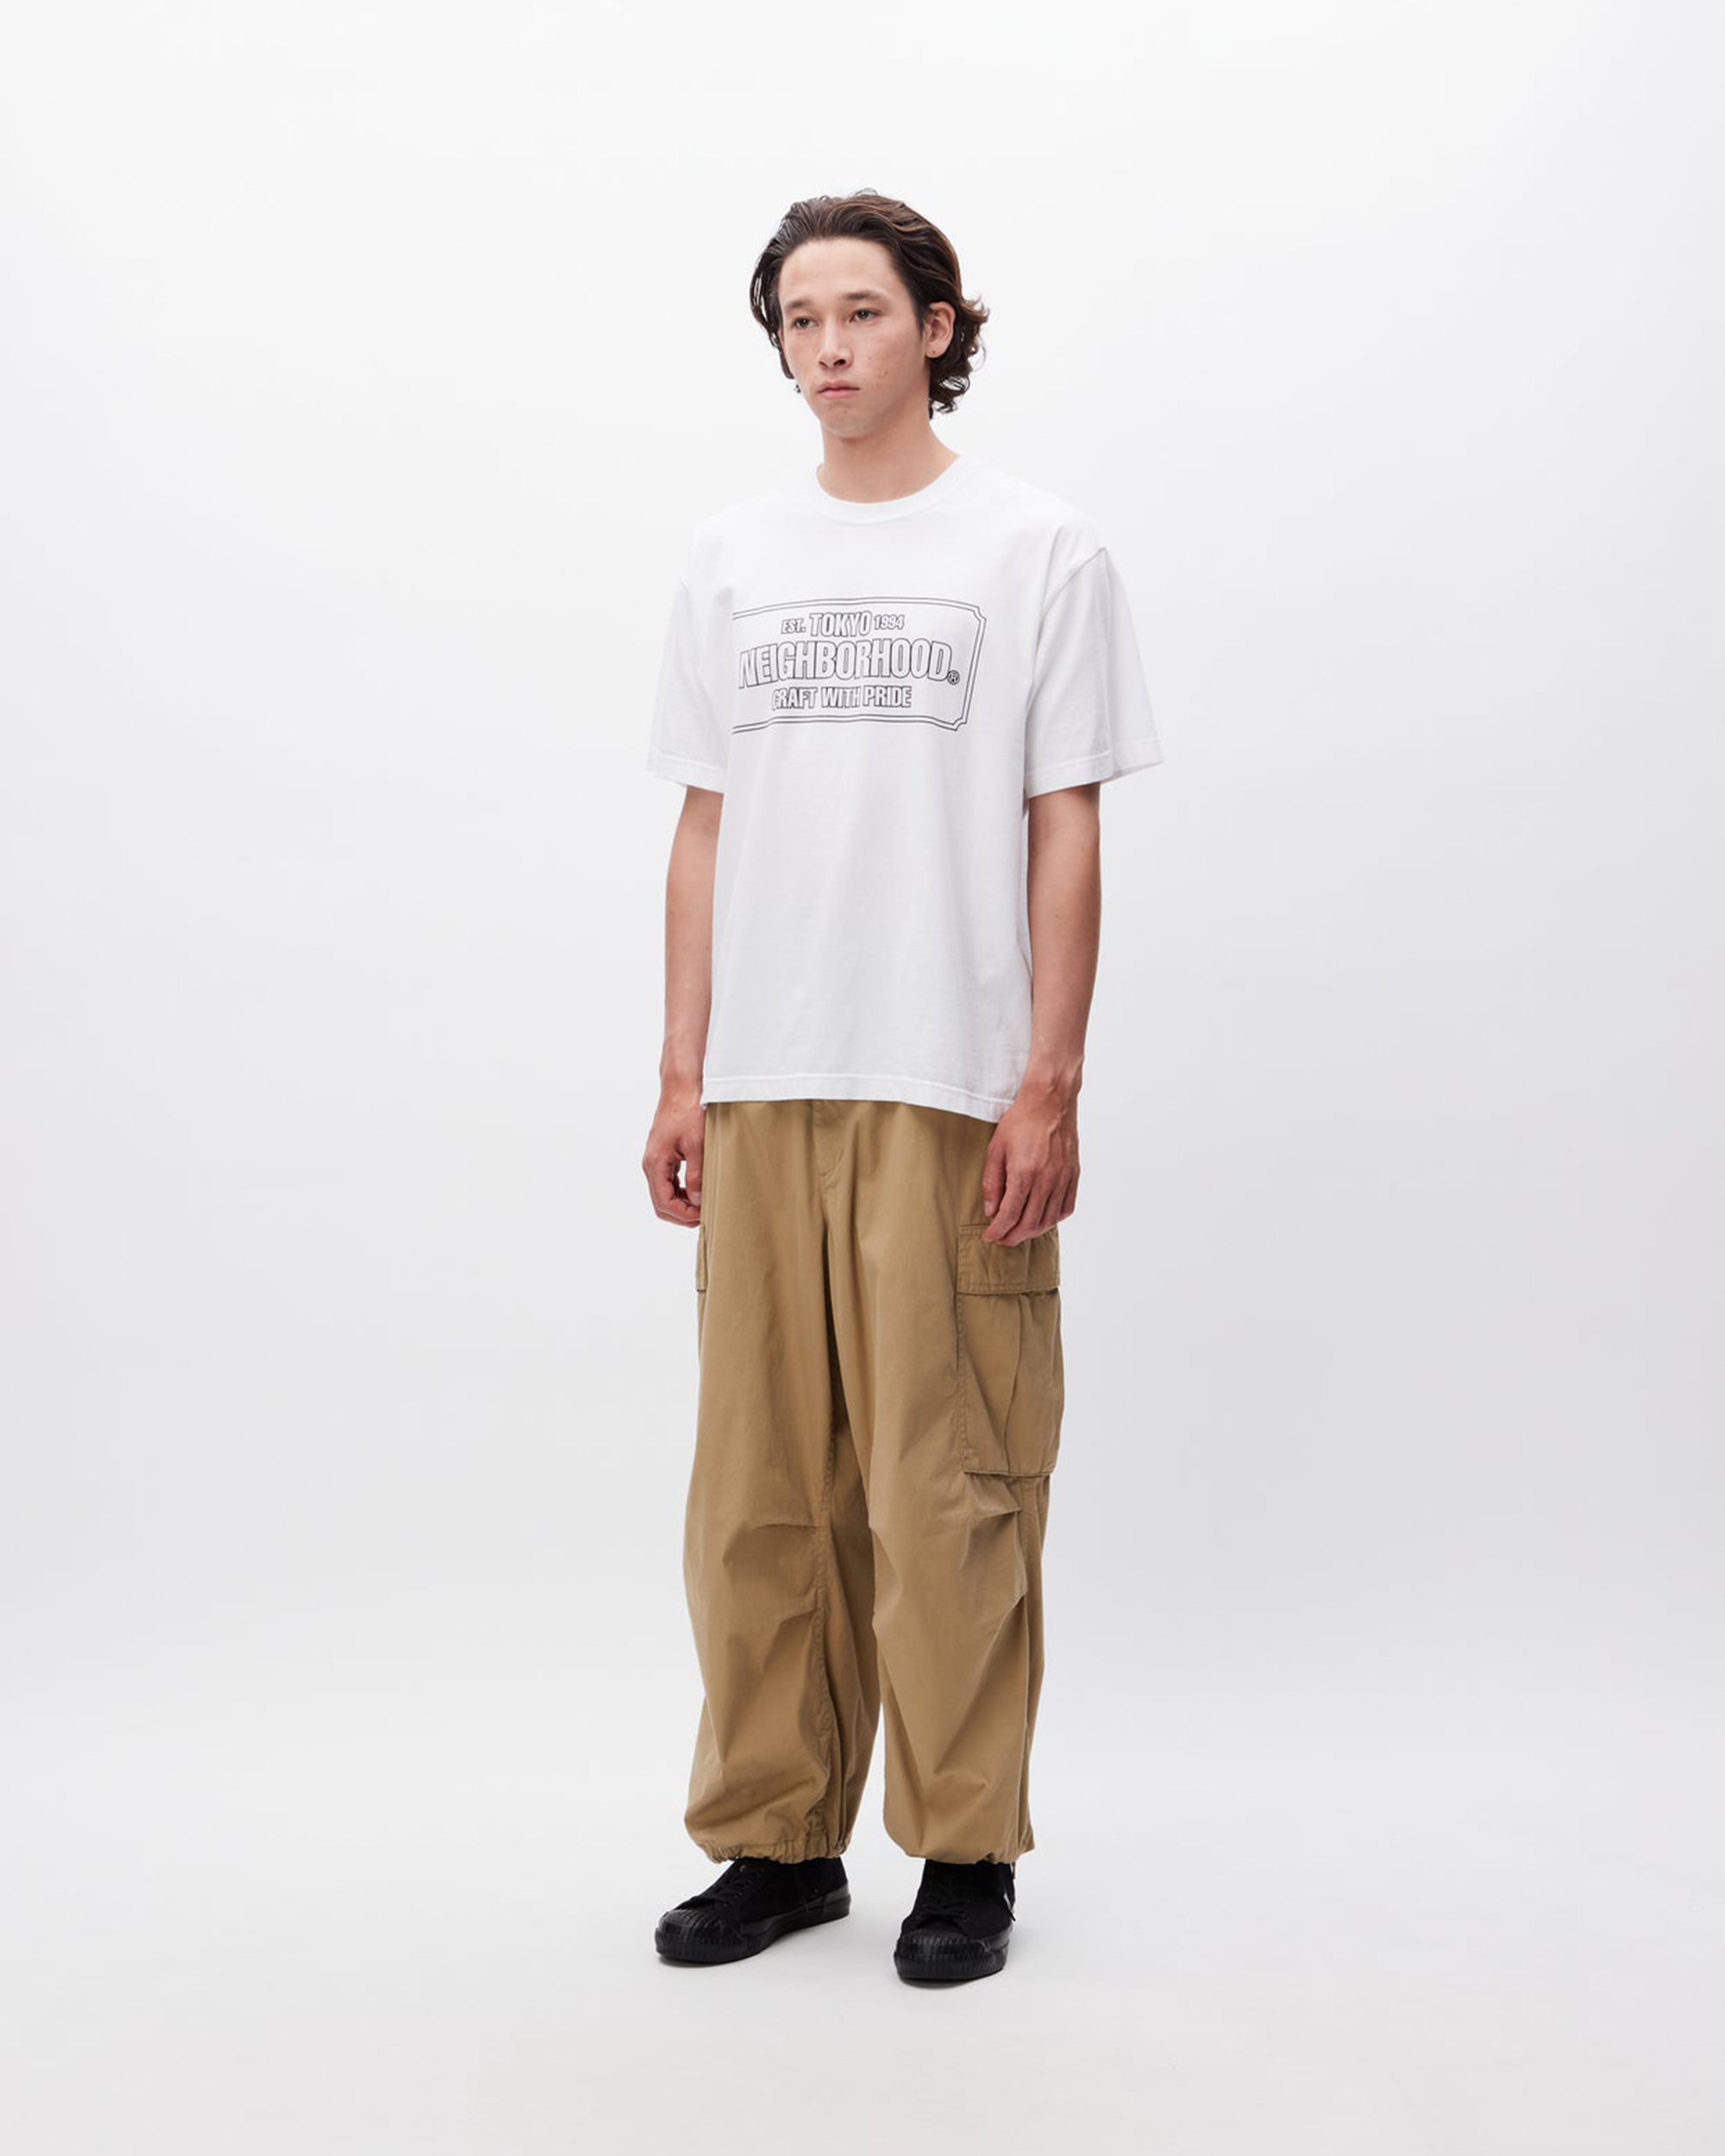 Woven Wide Cargo Pants - Olive Drab